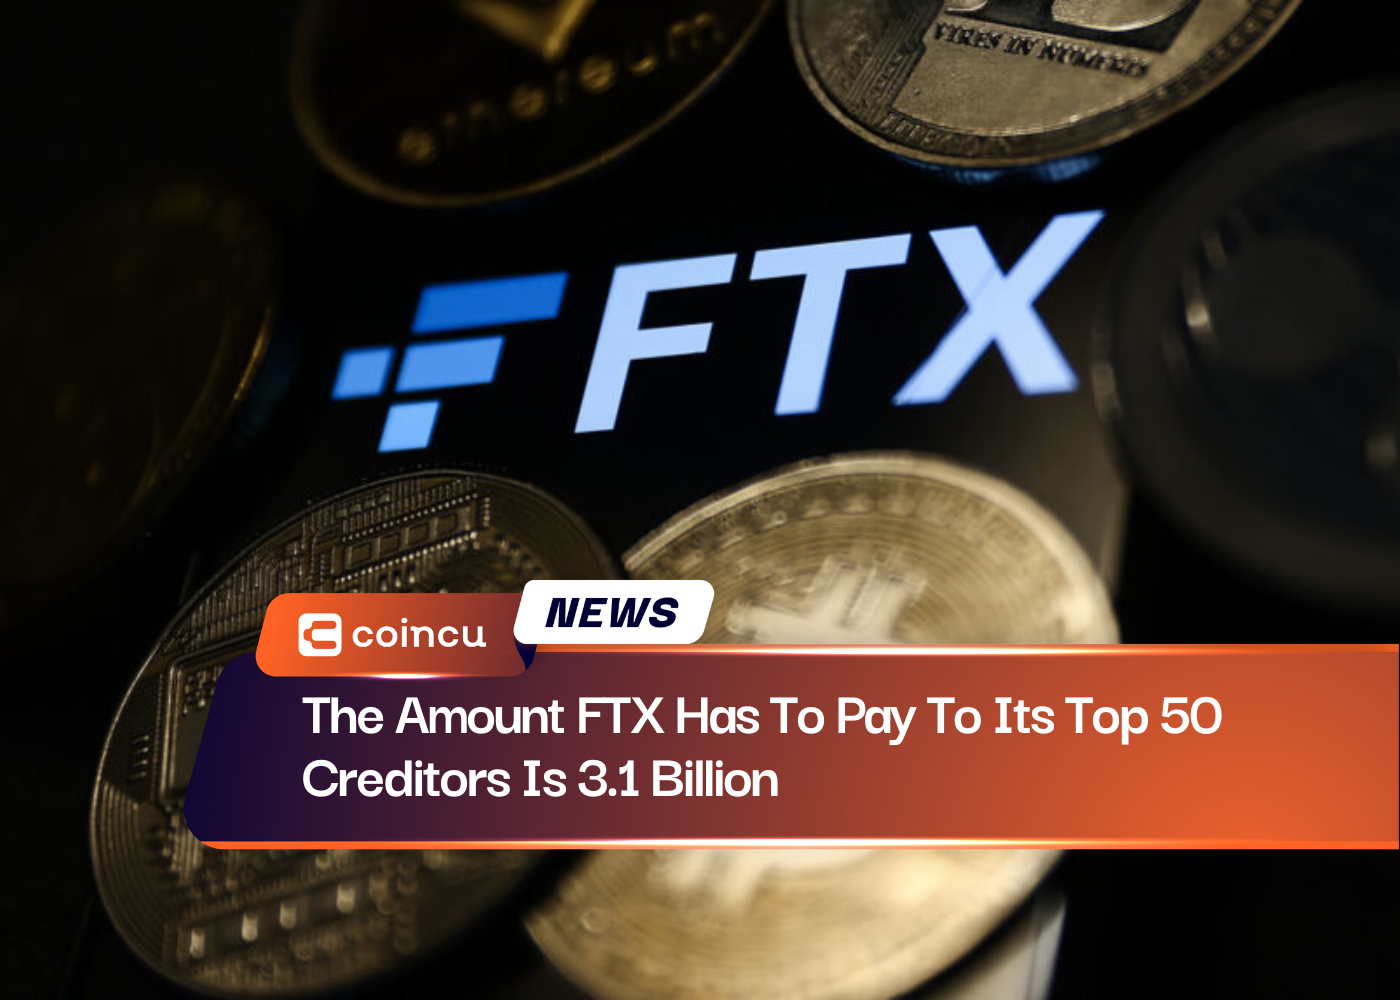 The Amount FTX Has To Pay To Its Top 50 Creditors Is 3.1 Billion